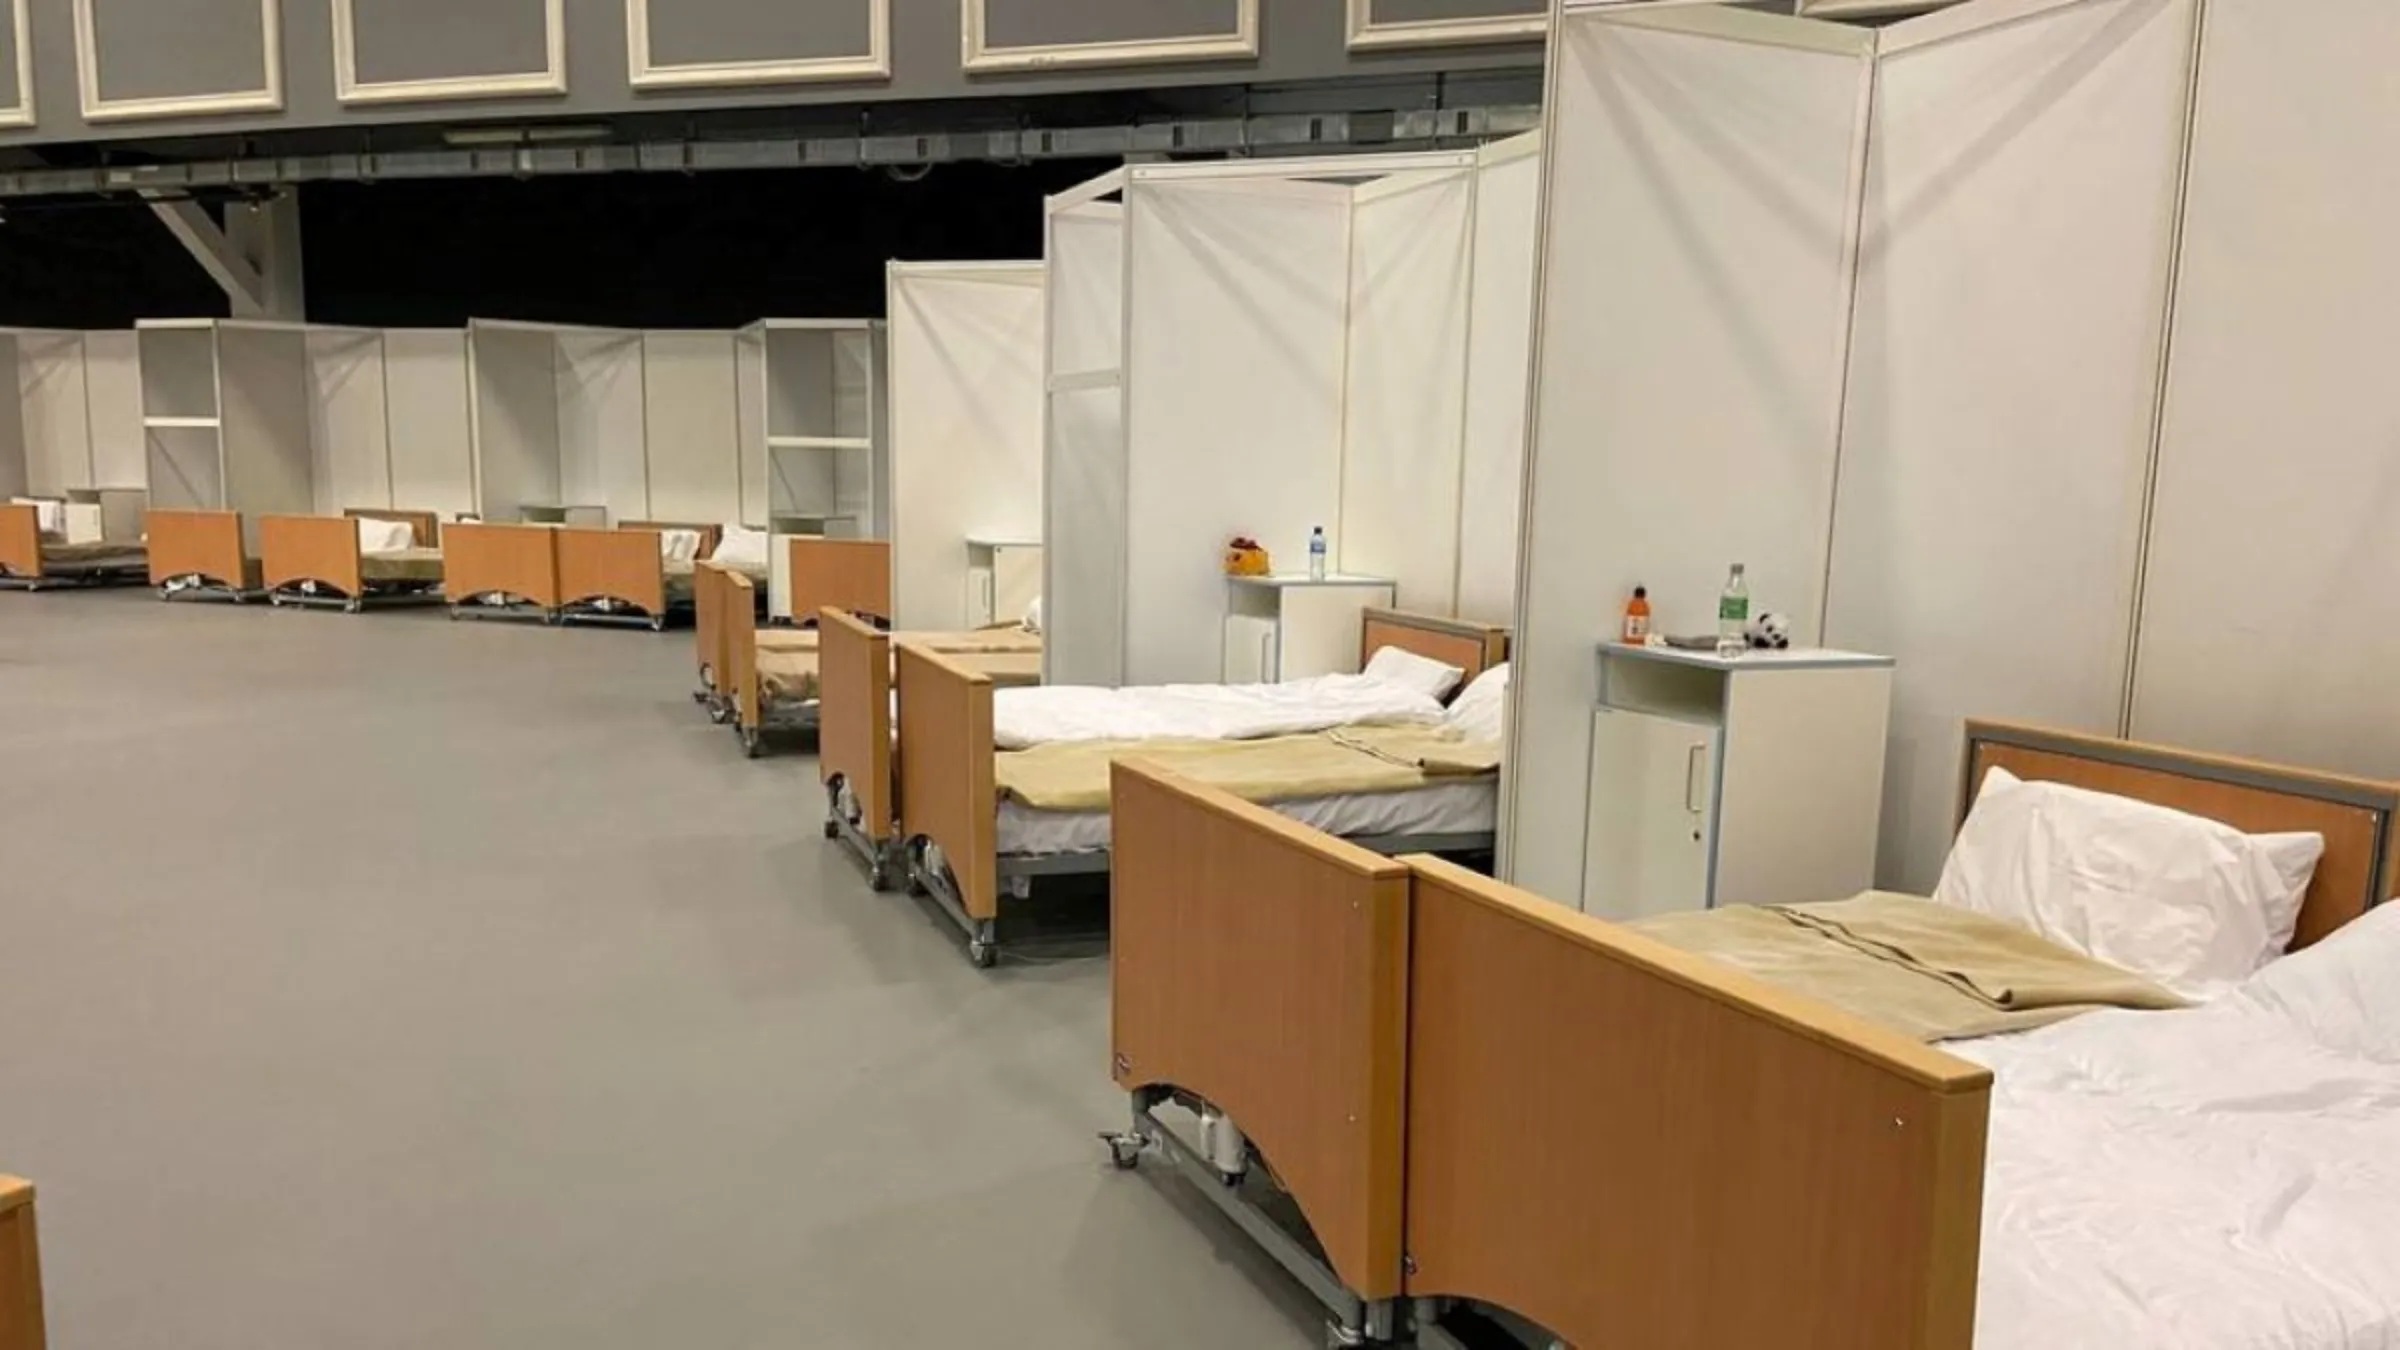 Citywest facility, where several emergency beds are laid out in a room originally intended for Ukrainians and now used for asylum seekers, in Dublin, Ireland, April 2022